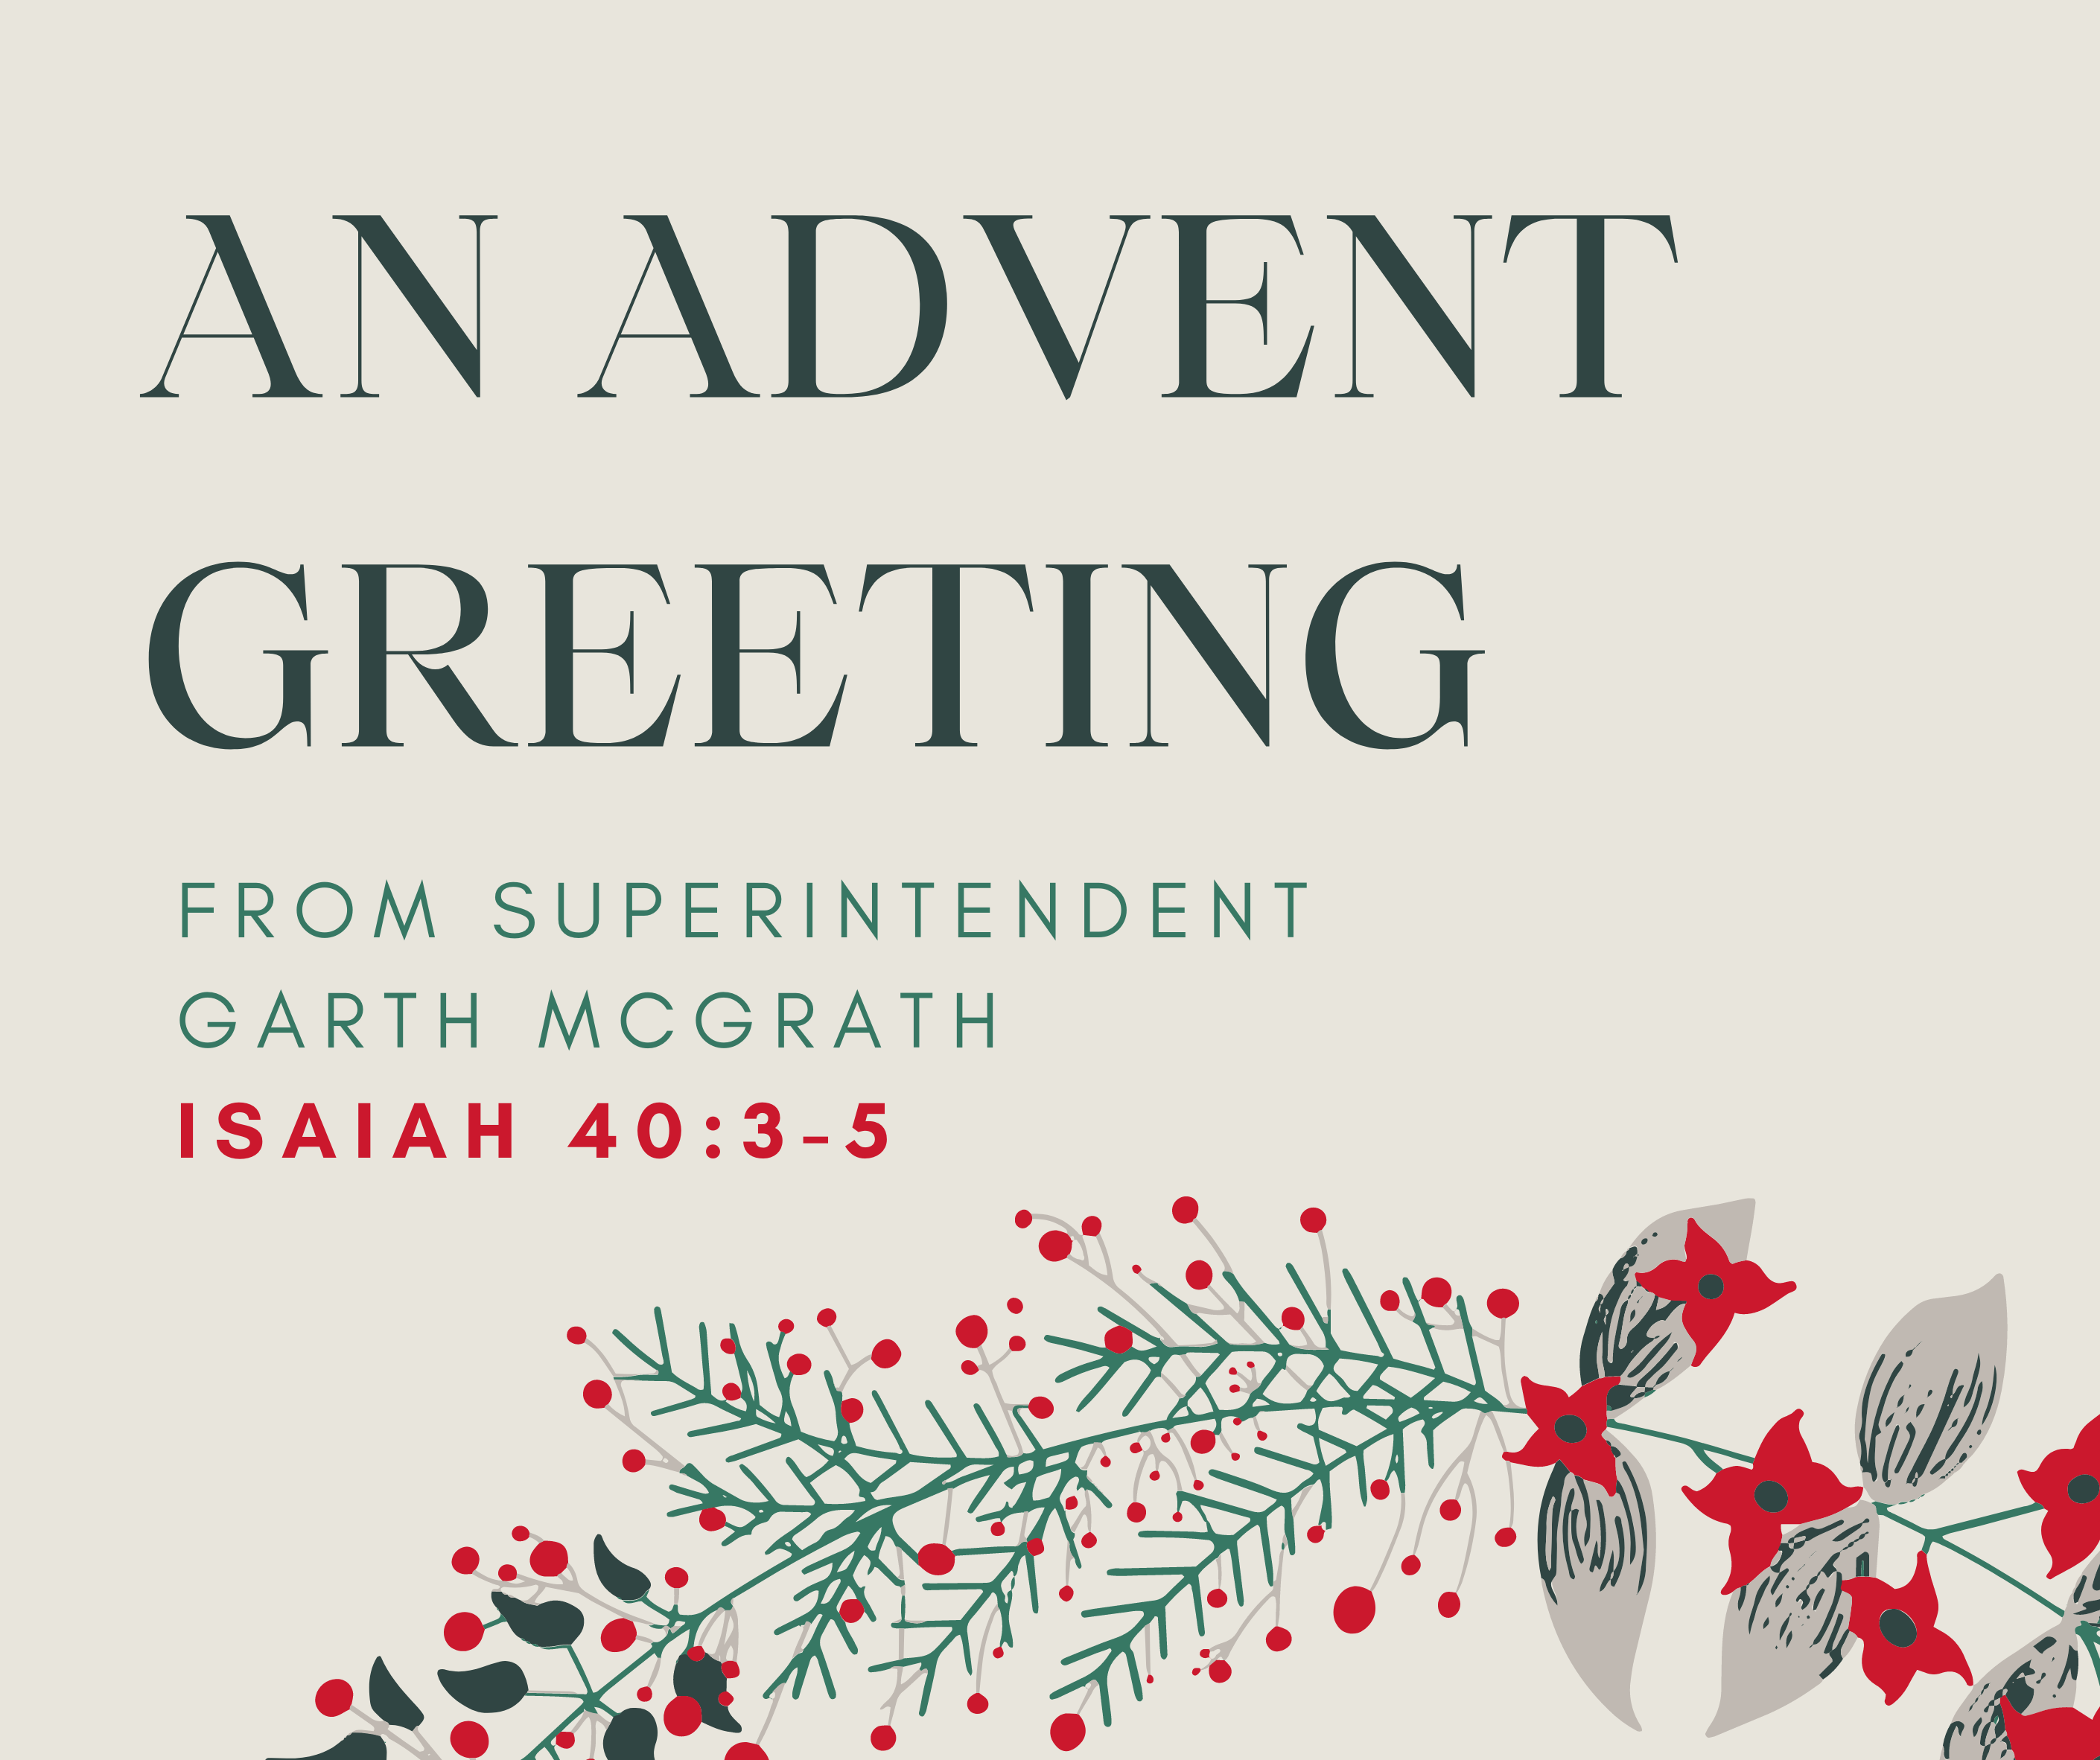 Advent Letter to Great Lakes Conference Churches